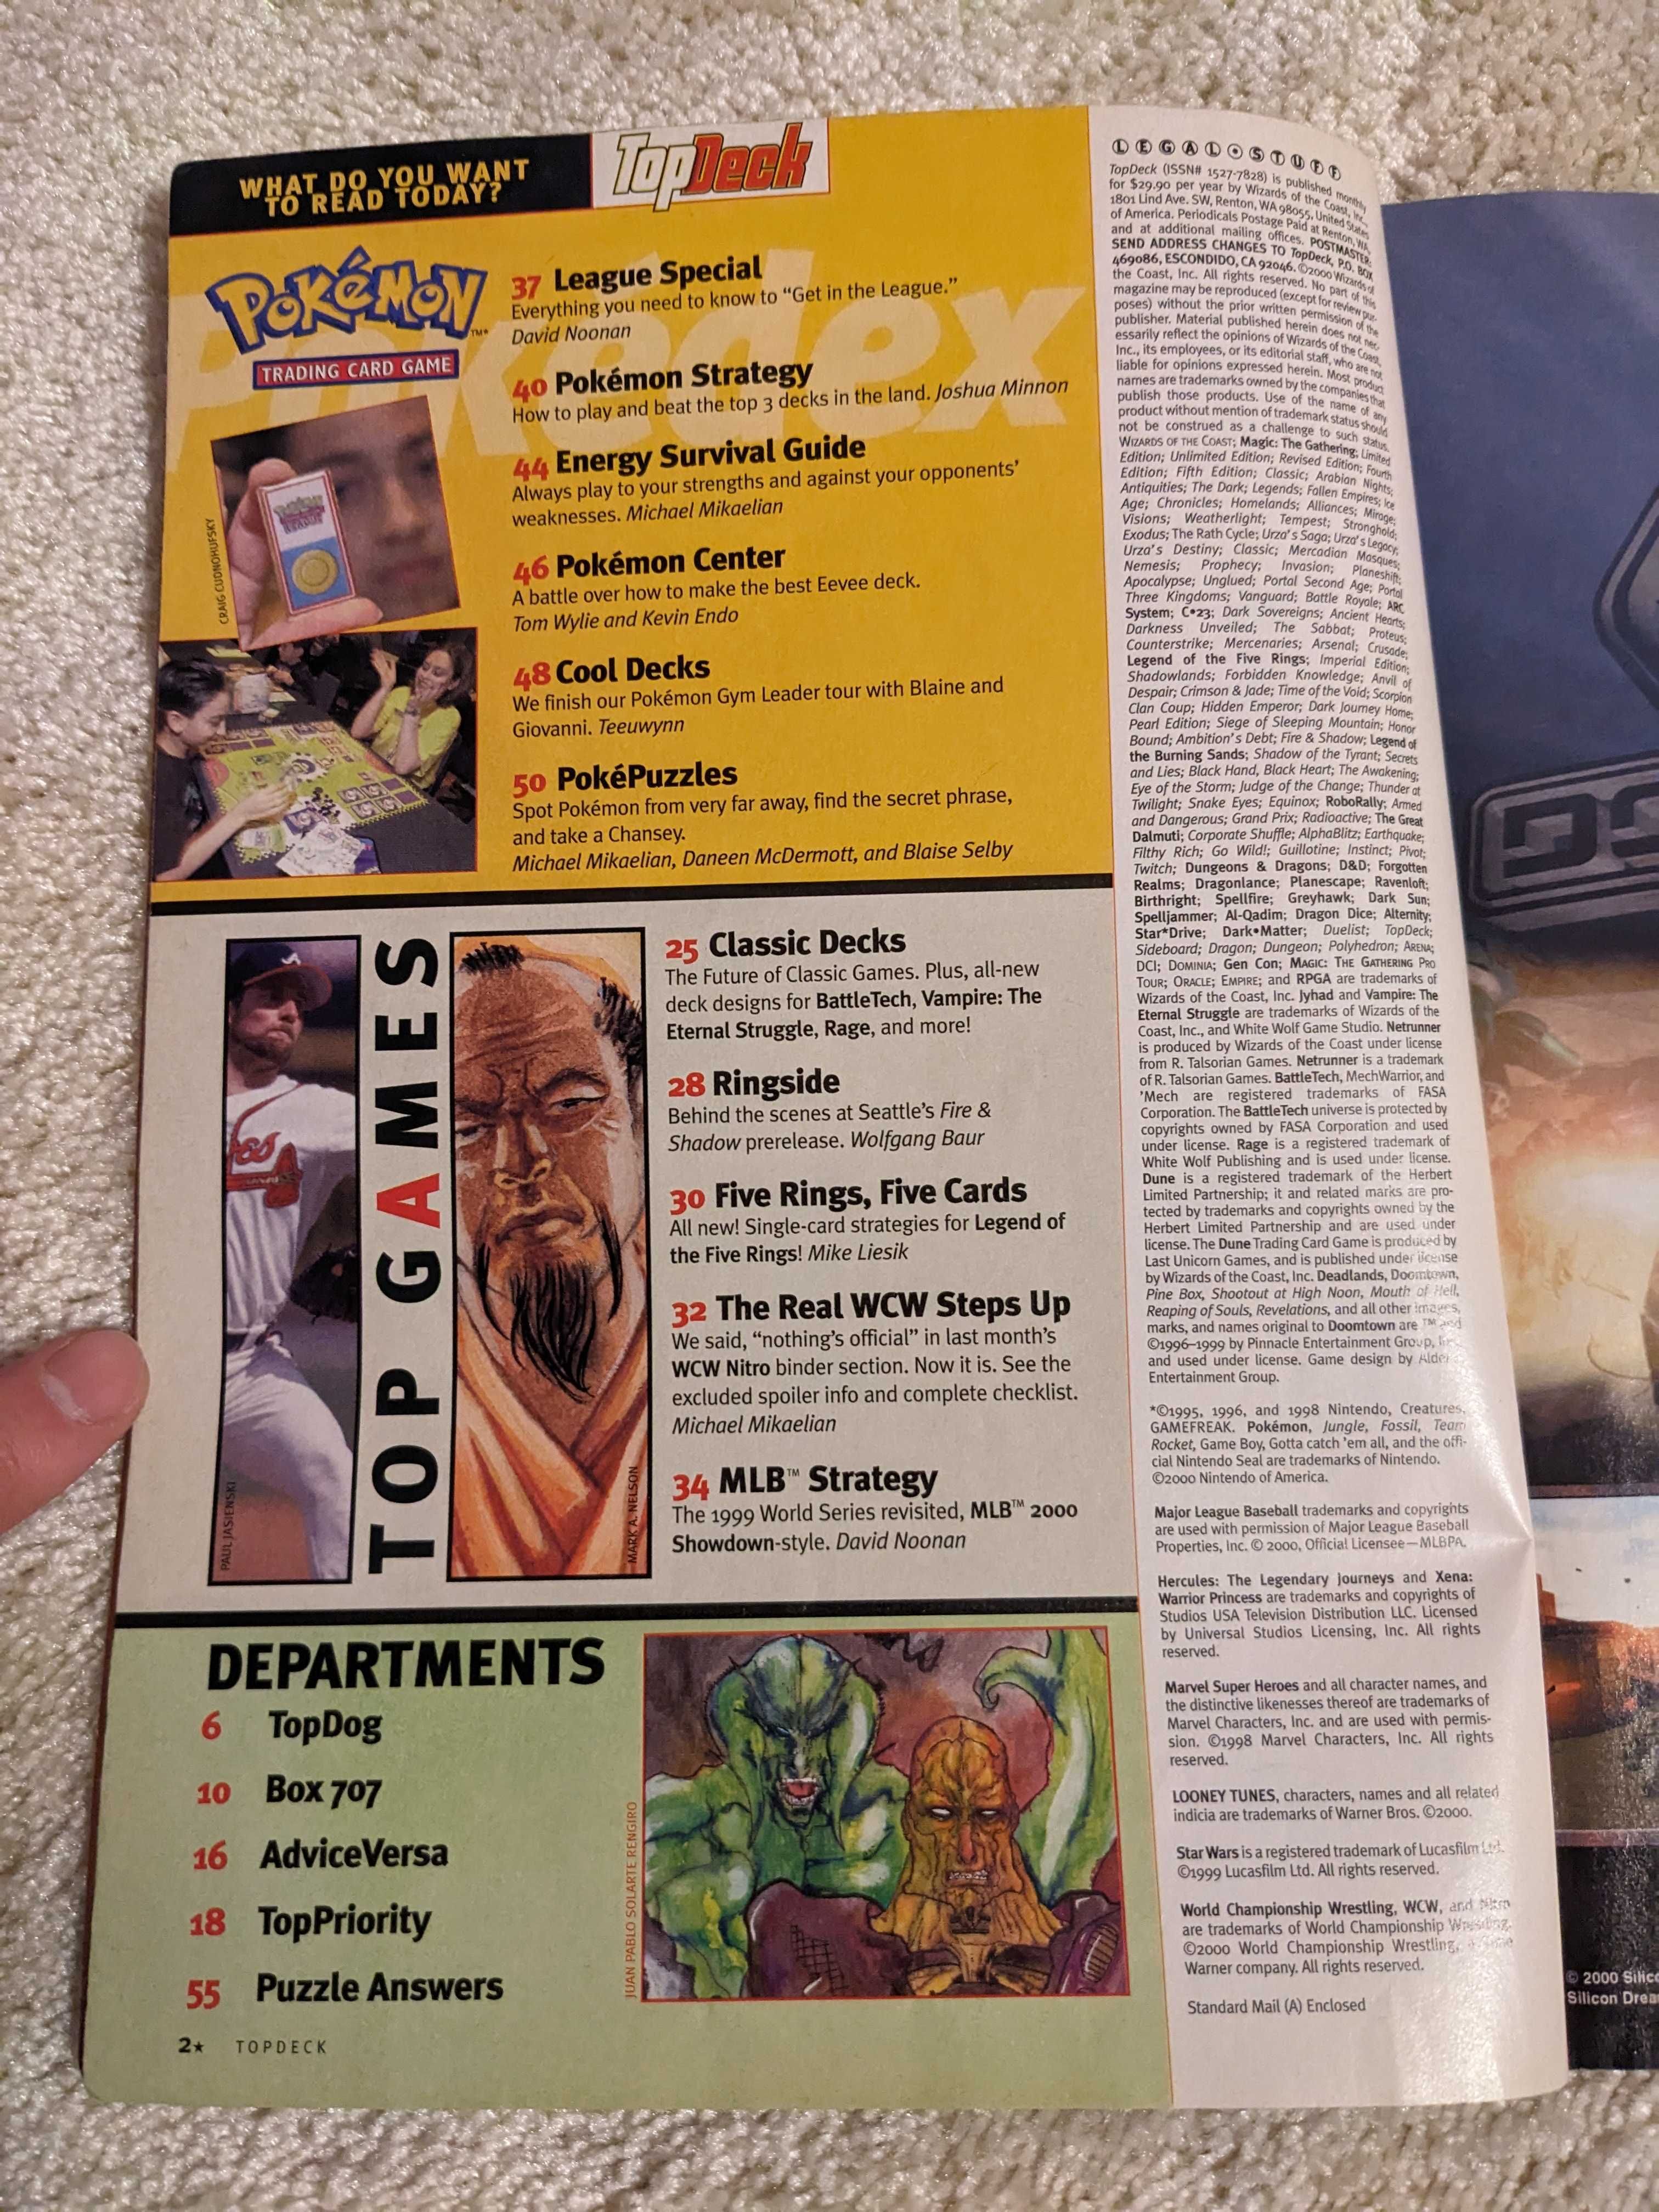 TopDeck July 2000 /  Volume 2 Issue 7 / Magic The Gathering / Prophecy